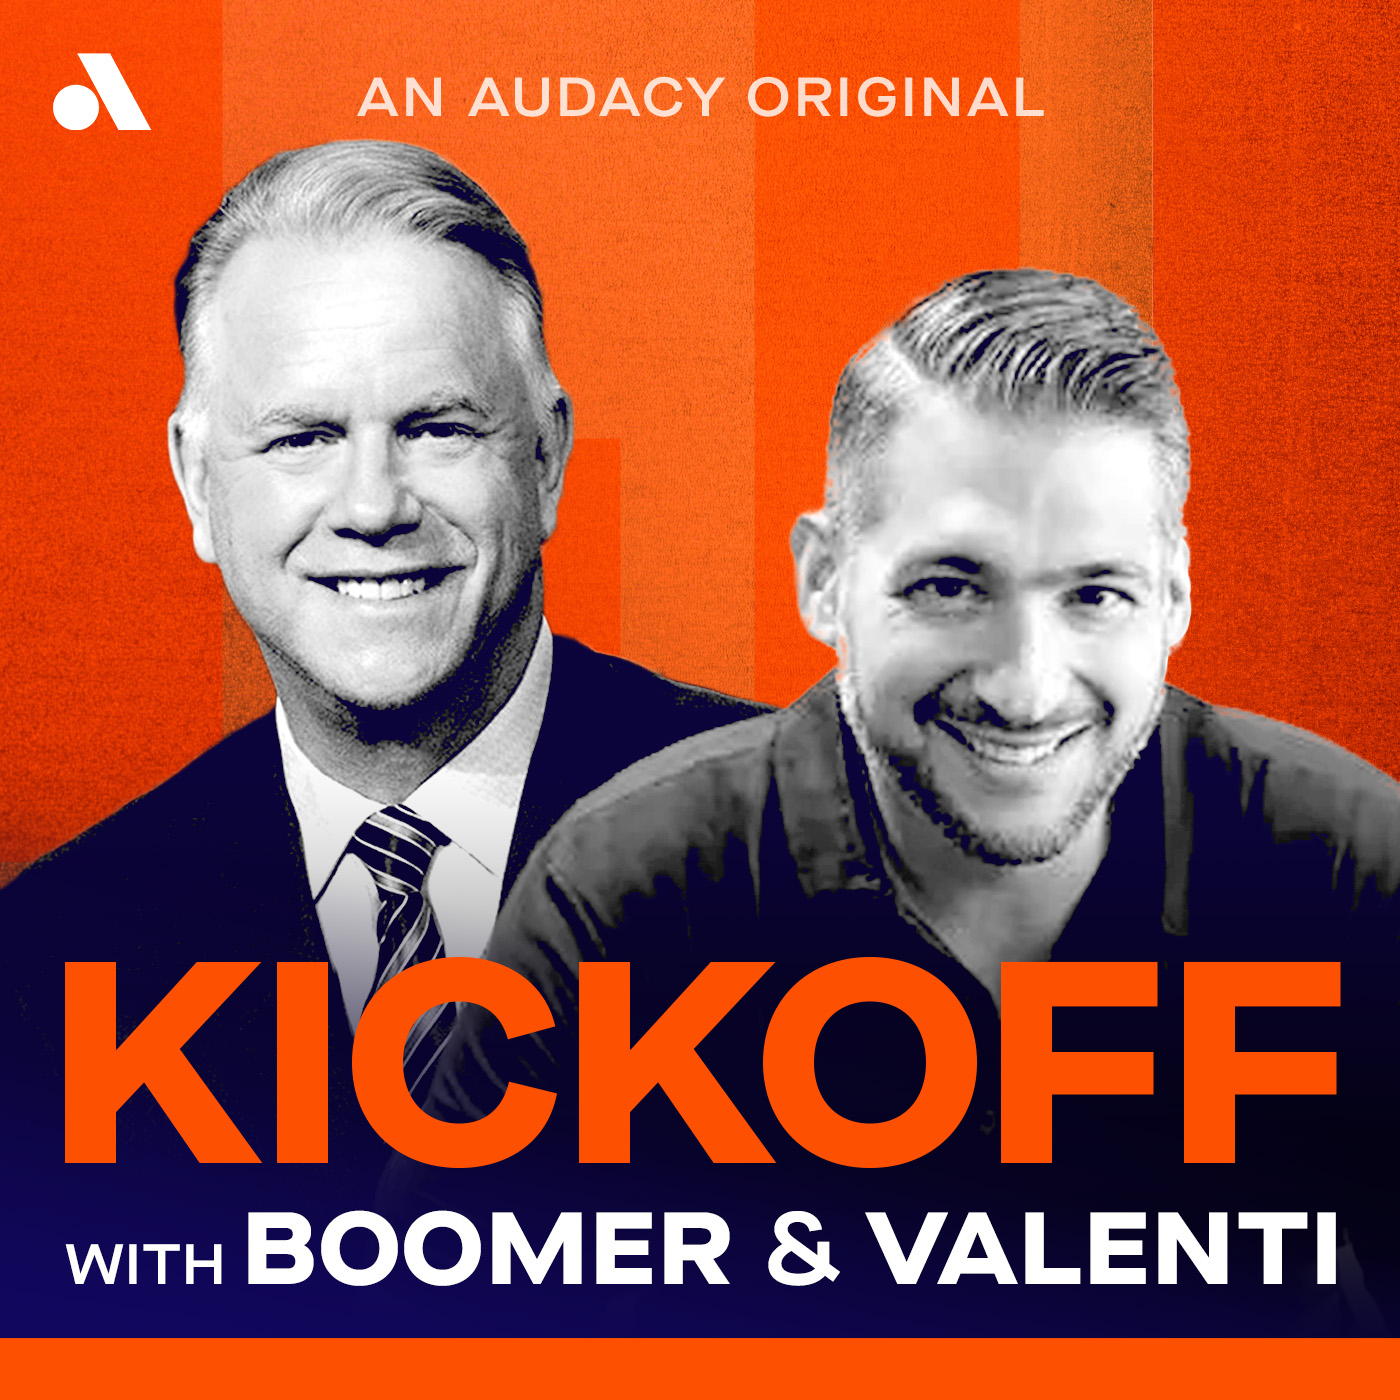 Kickoff with Boomer Esiason and Mike Valenti for week 10 of the NFL.